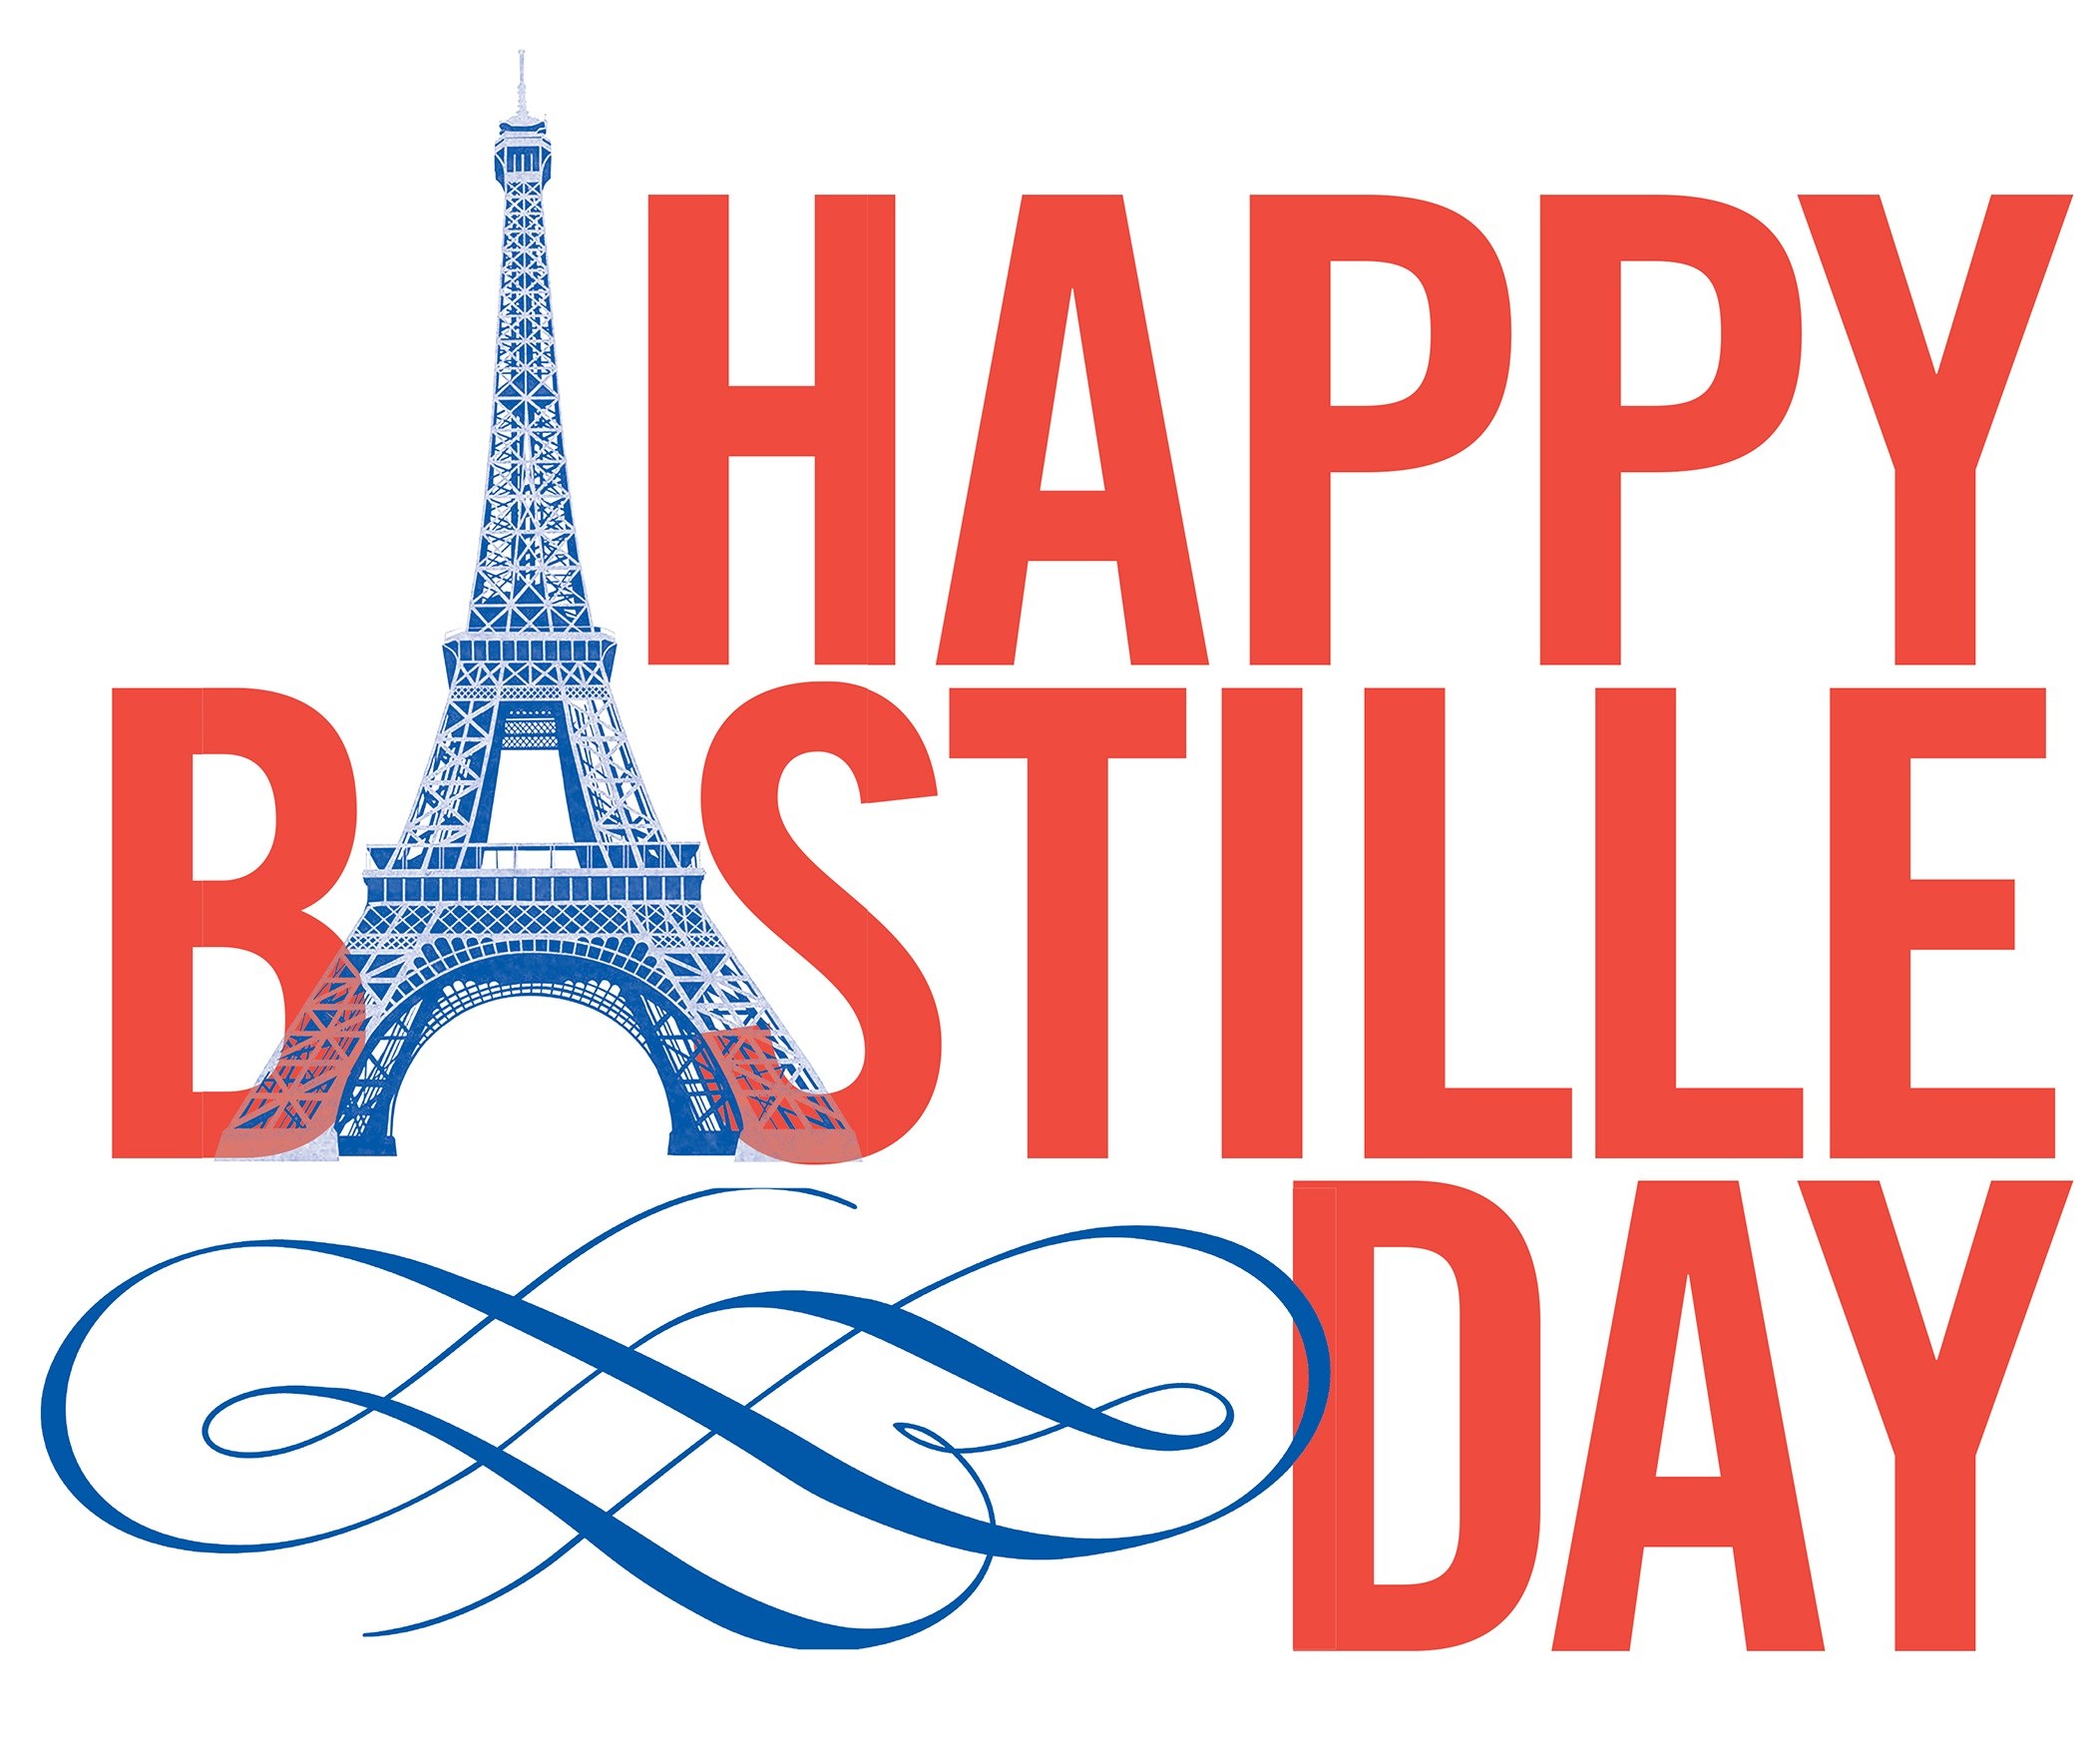 Happy Bastille Day Quotes Wishes Sms Sayings Image Whatsapp